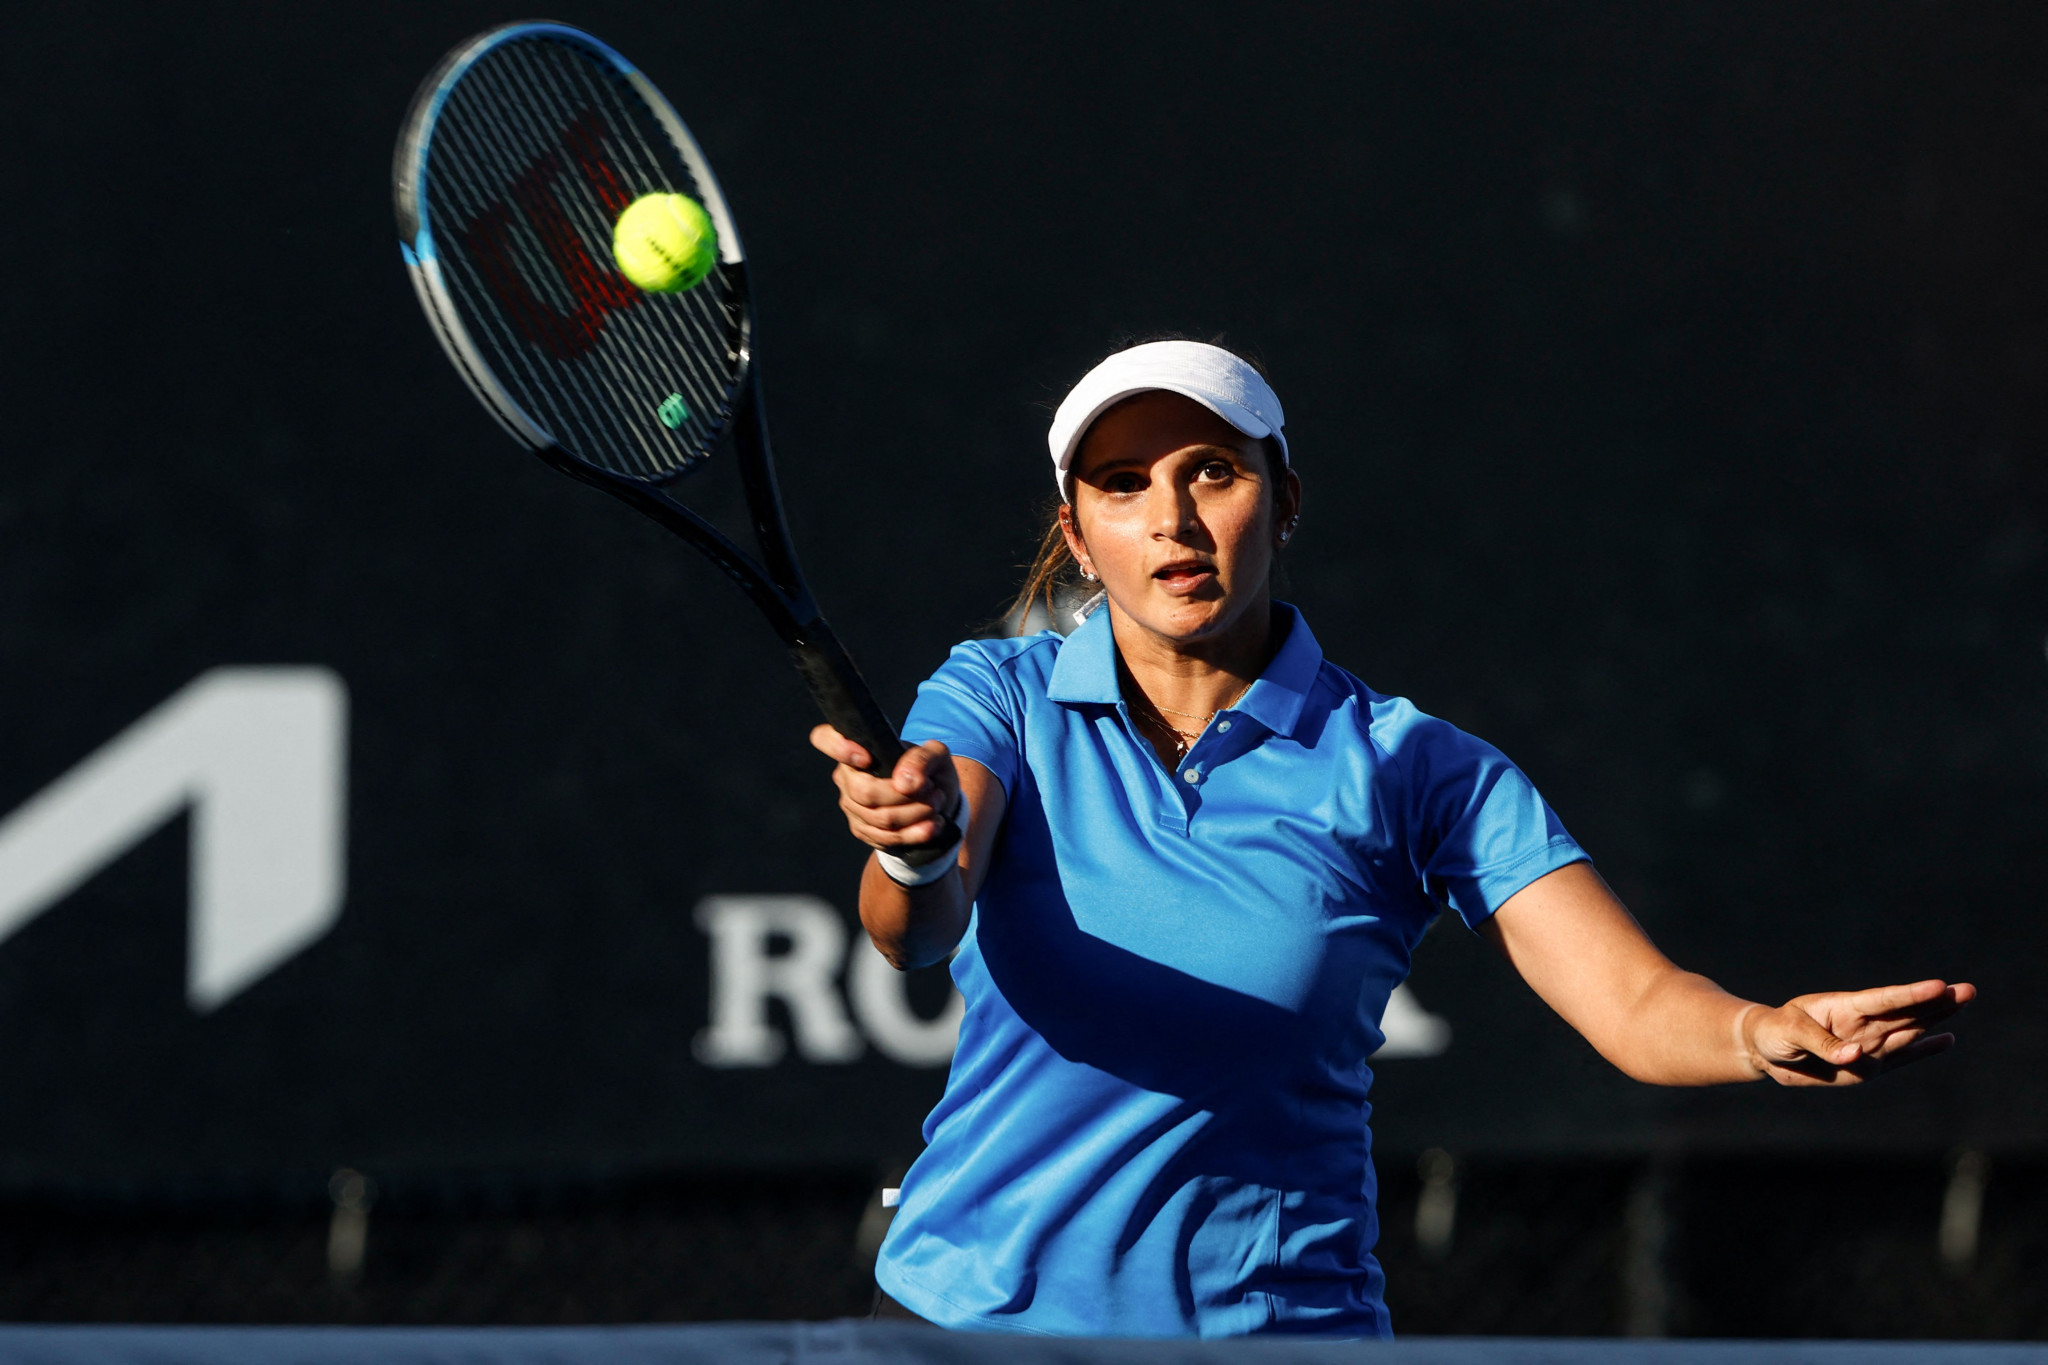 Sania Mirza of India is planning to retire after the WTA Dubai Duty Free Tennis Championships next month ©Getty Images